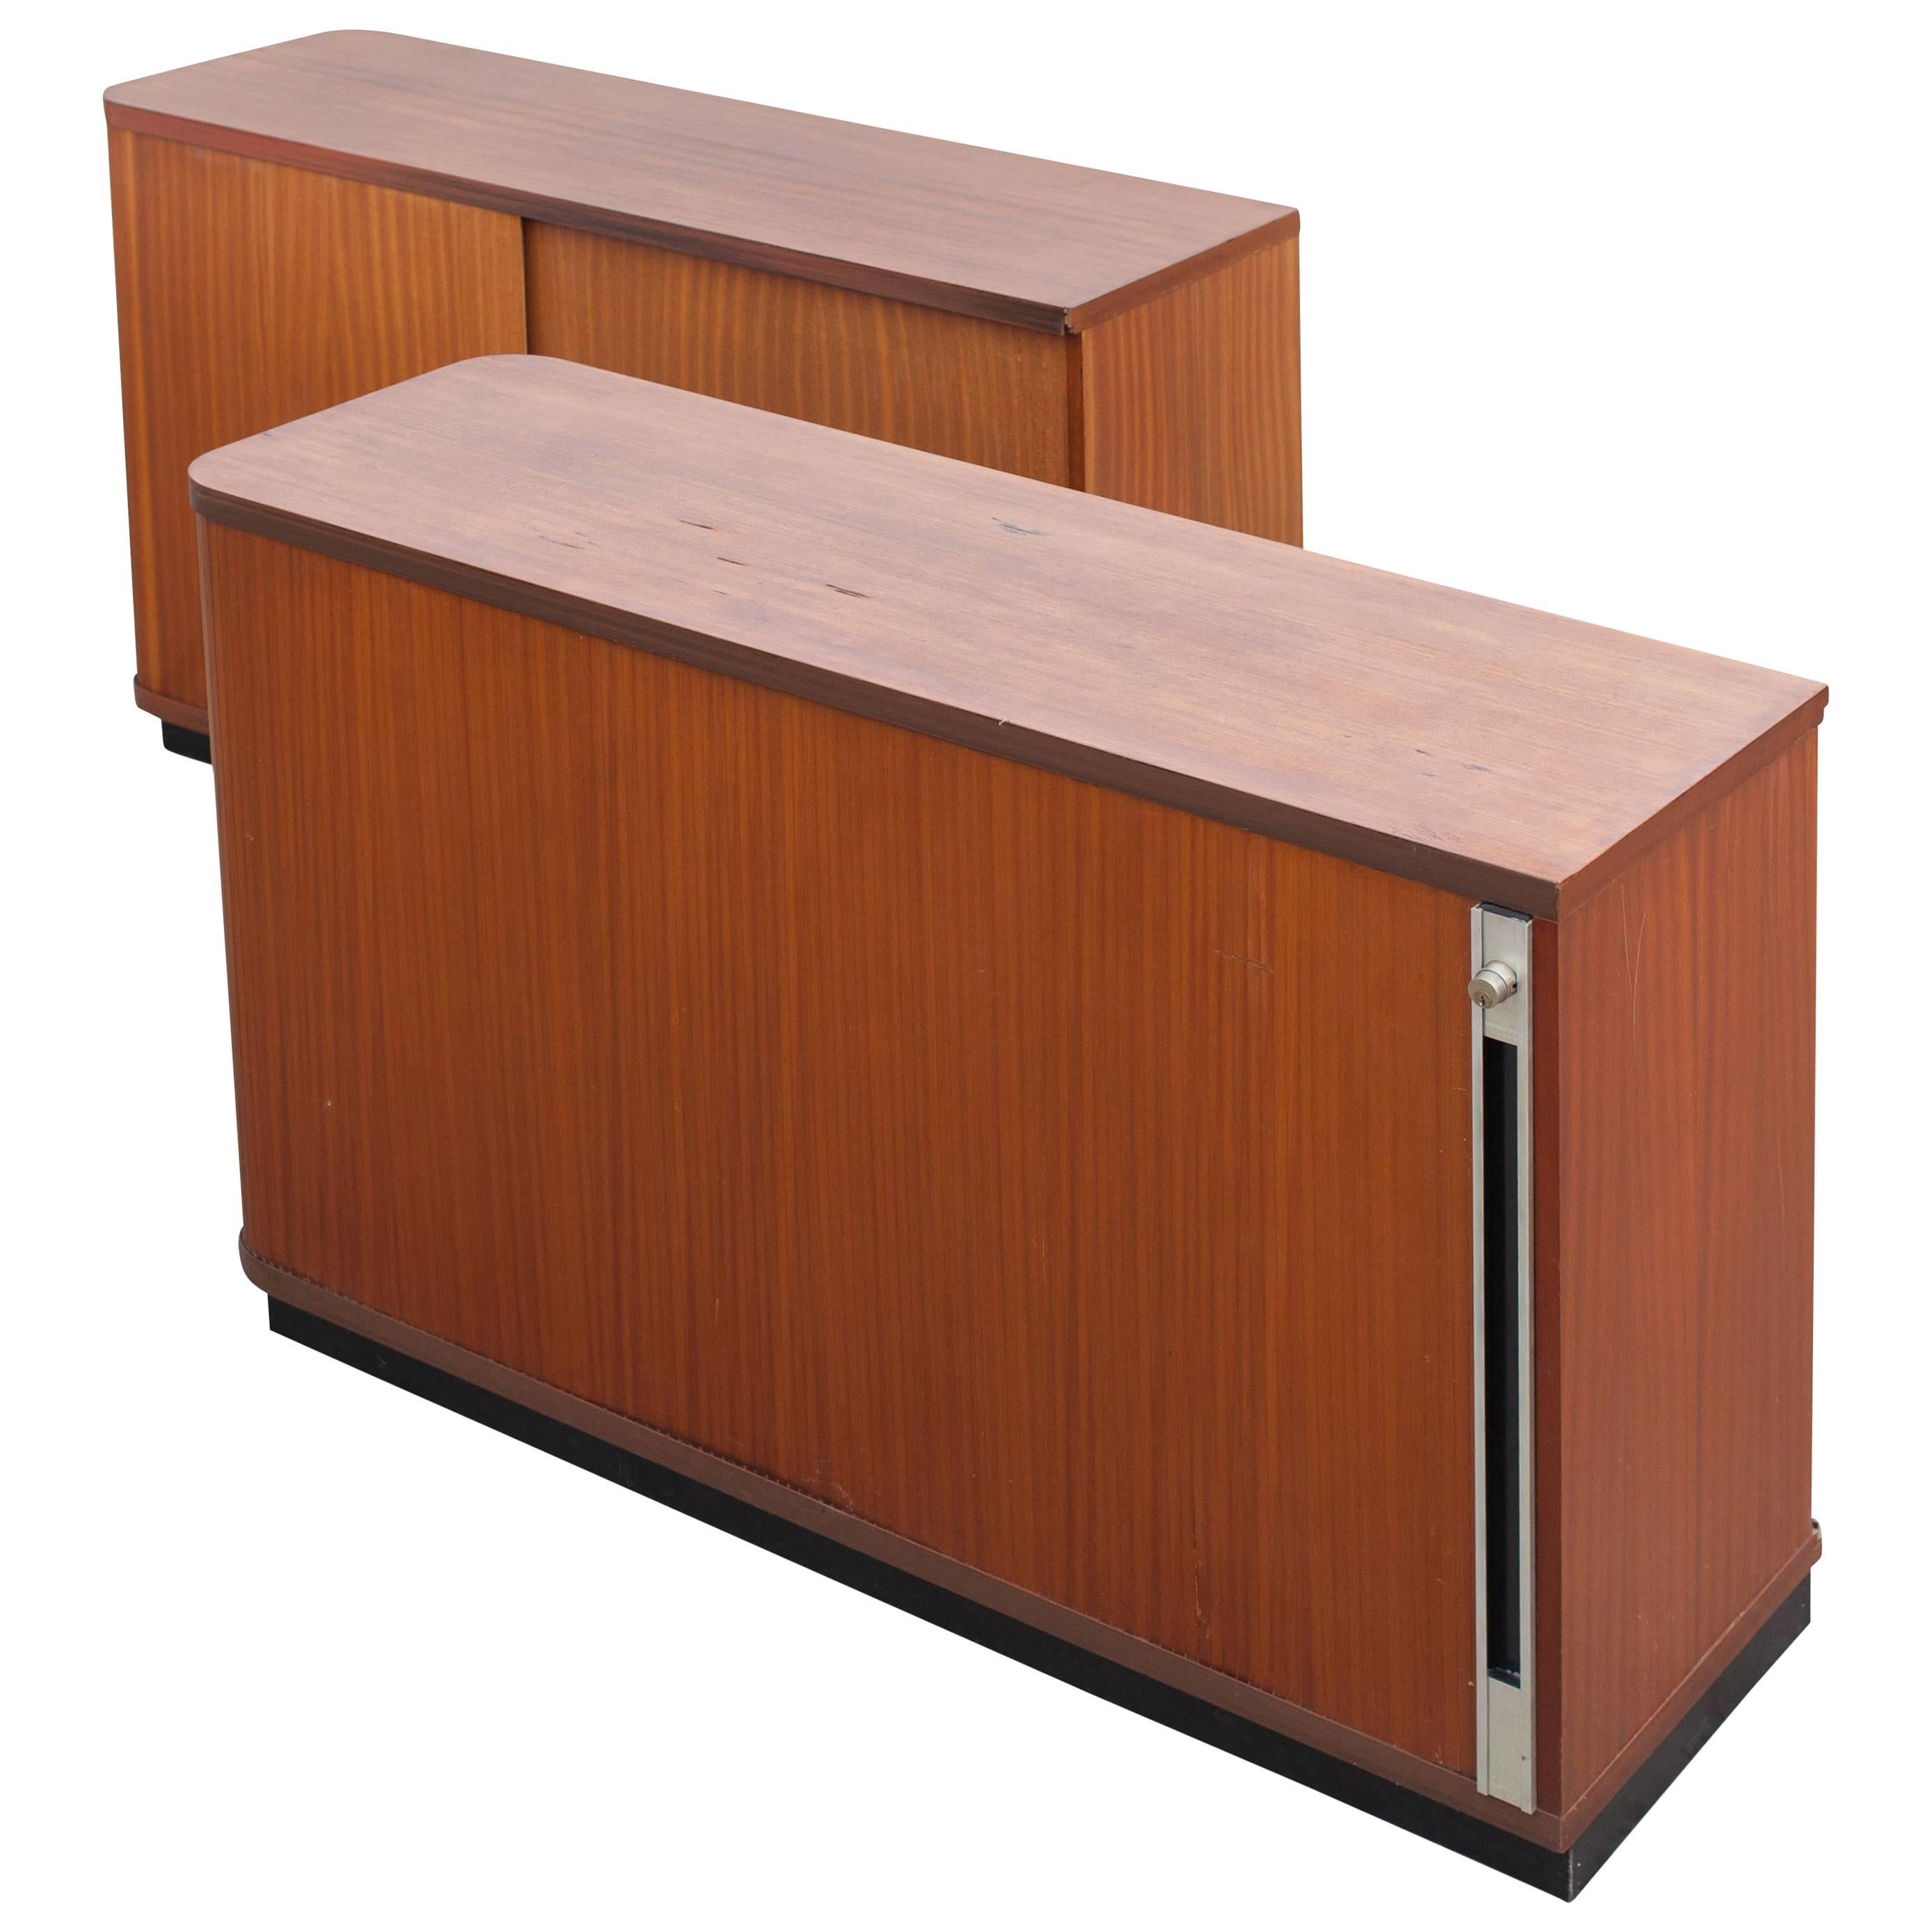 Florence knoll style Set of two teak office sideboards with tambour doors.

Can be used as room dividers since the back are also finished in teak. 
The cabinets are equipped with sliding doors, several shelfs and locks.

Measures: W 125, D 41.5, H